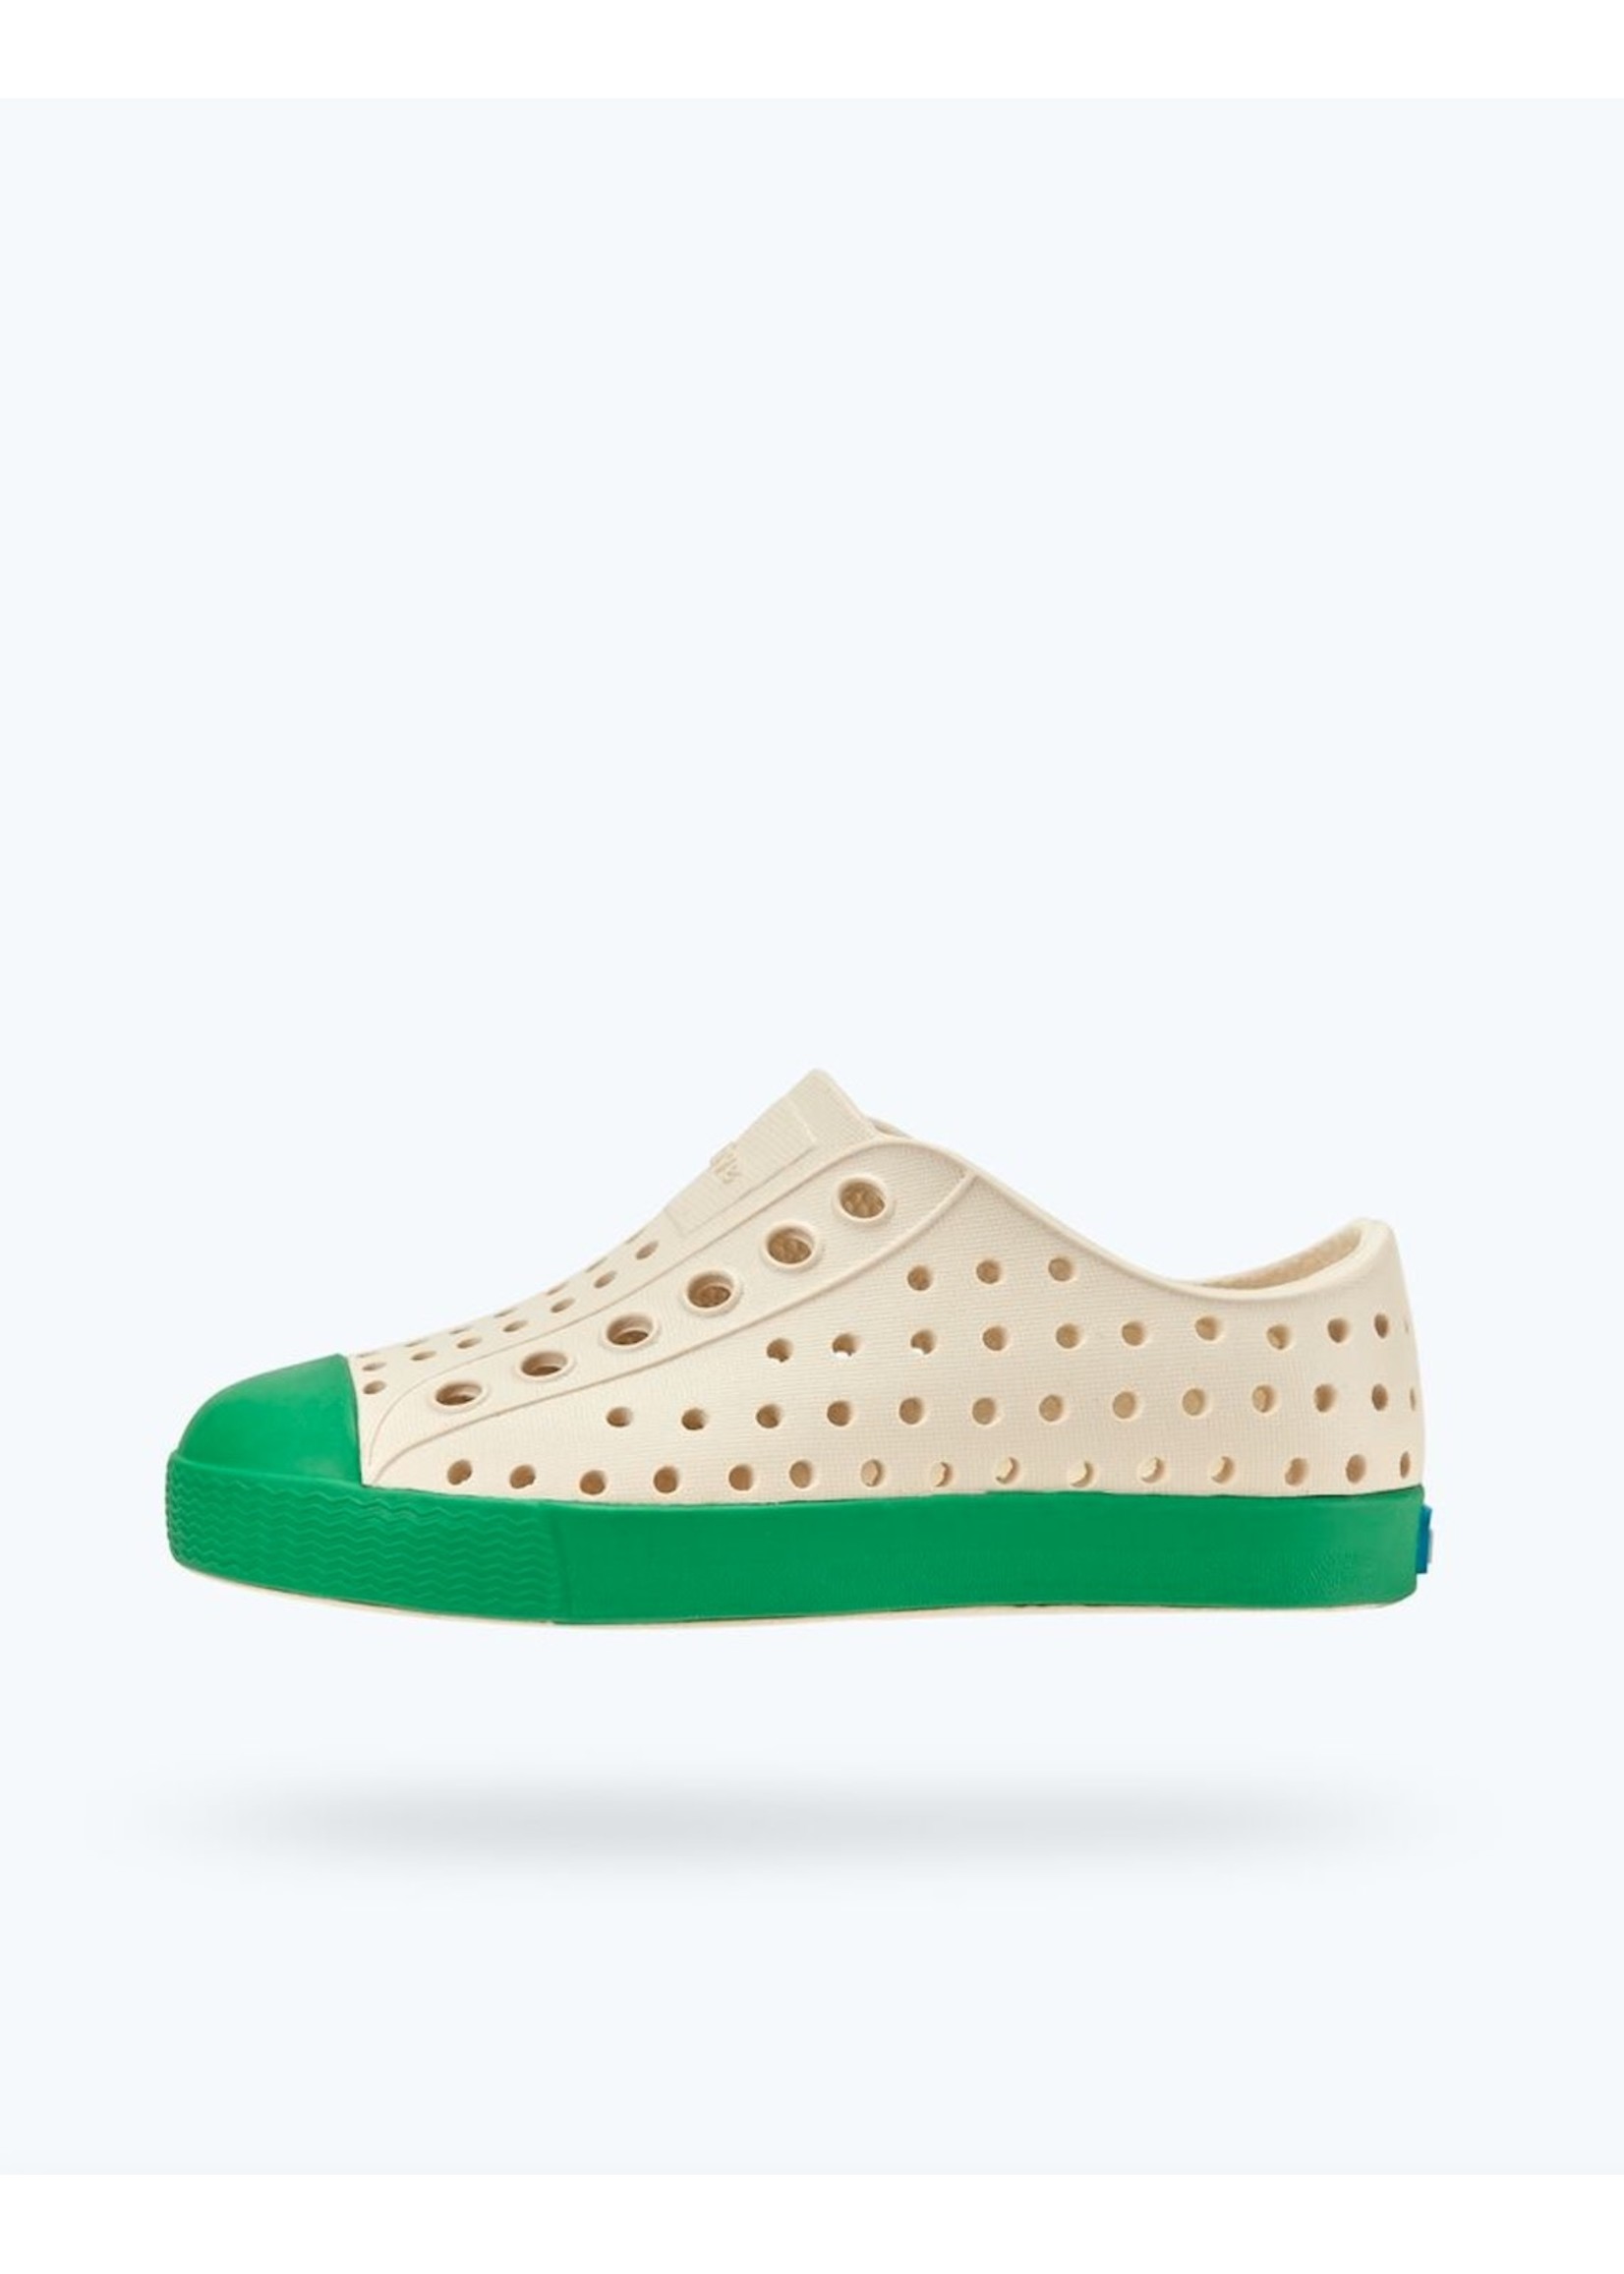 Native Shoes Native Shoes, Jefferson Youth / Junior in Bone White/ Picnic Green